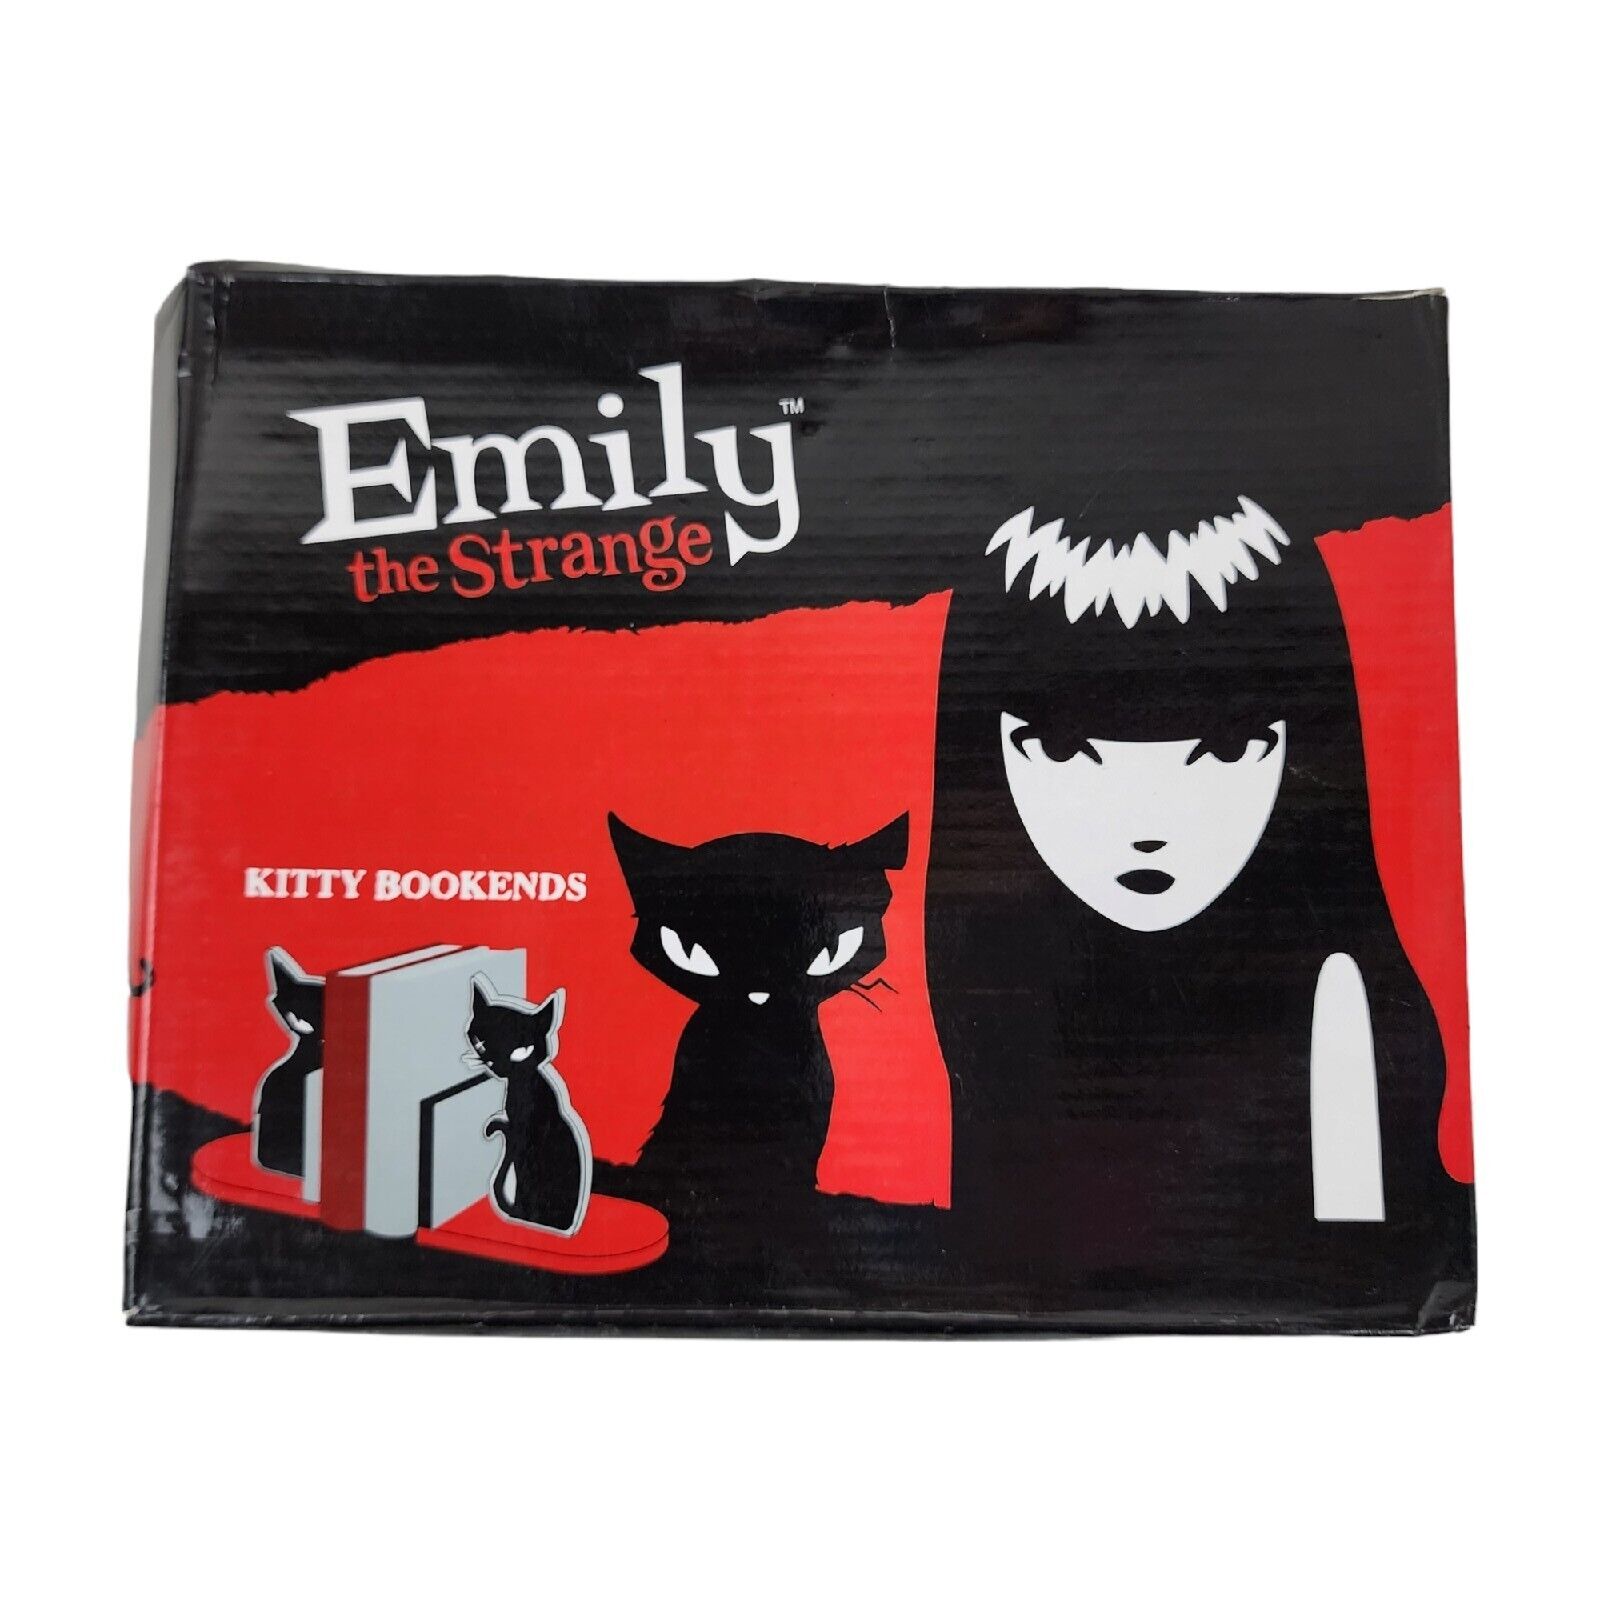 Emily the Strange Kitty Bookends Miles Nee Chee Black Cat Goth Red Comics Kitten